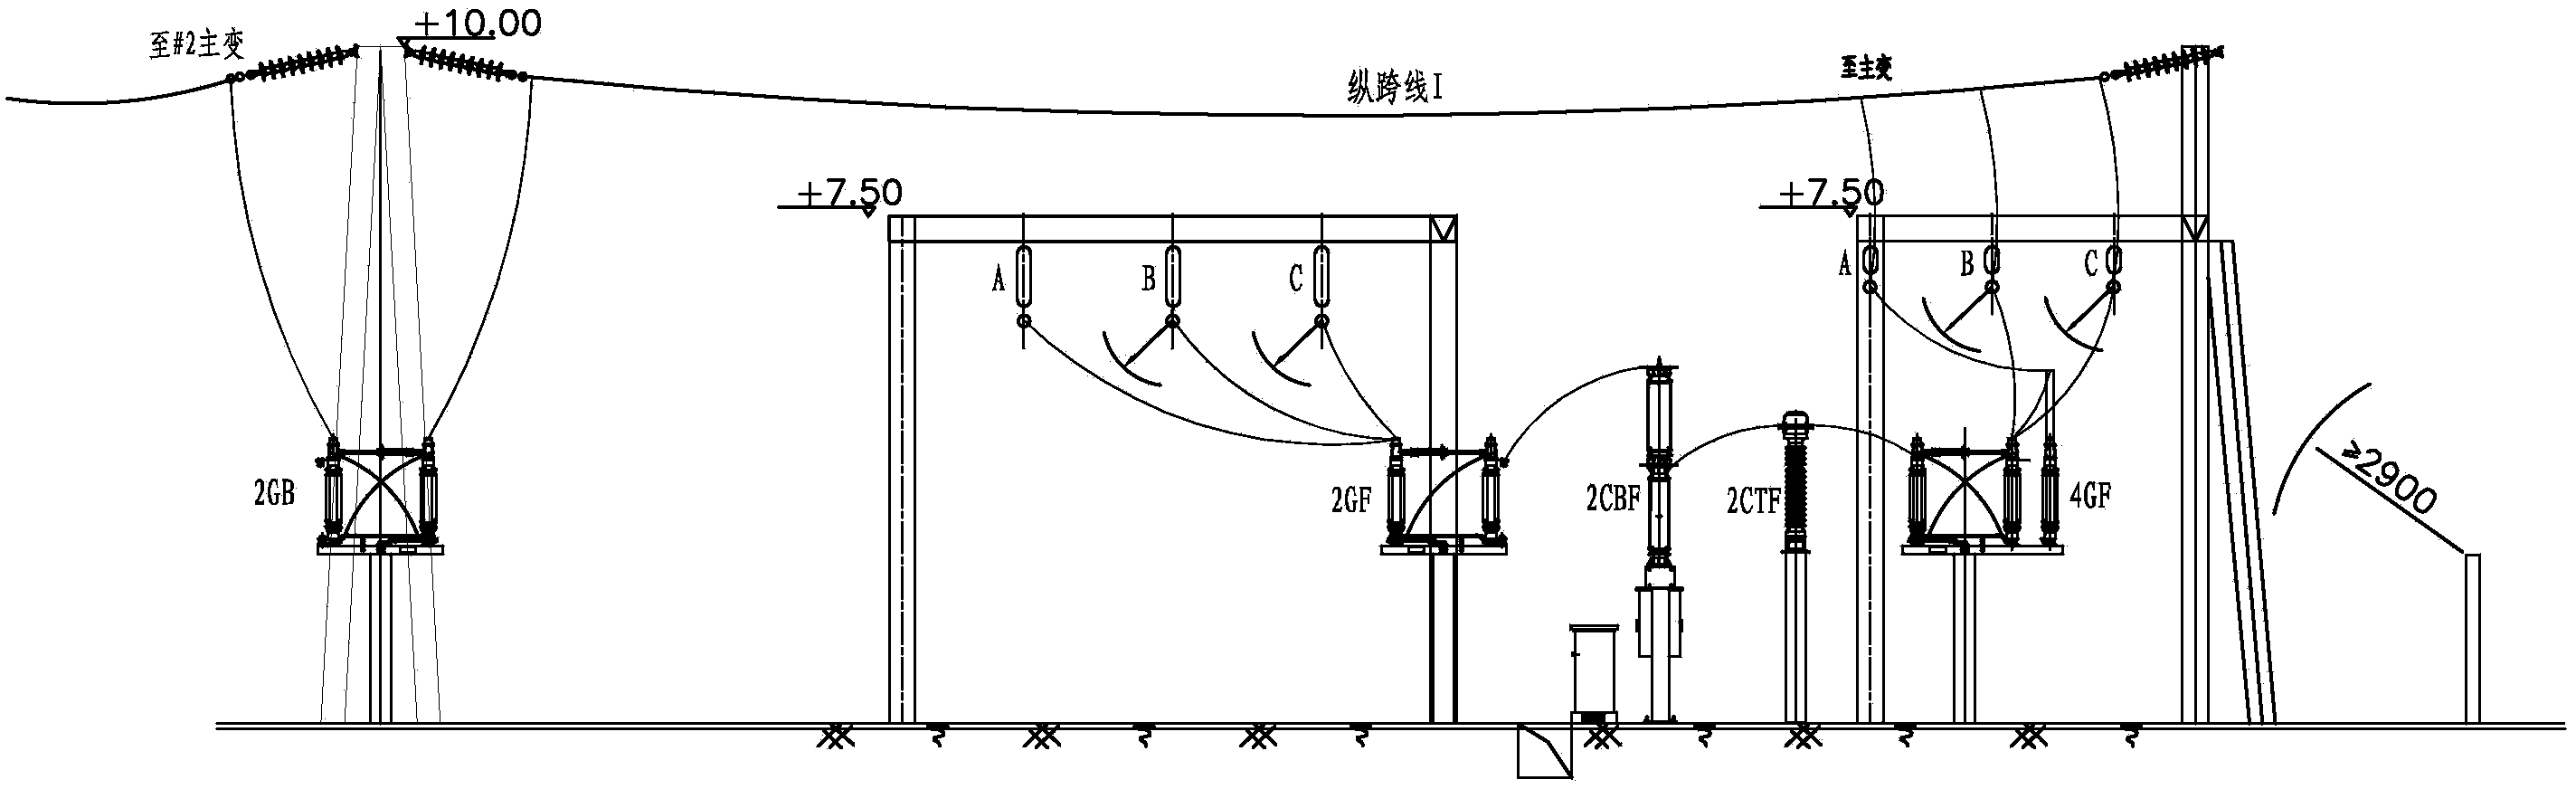 High-voltage distribution device with double breakers used for single bus segmentation and application thereof